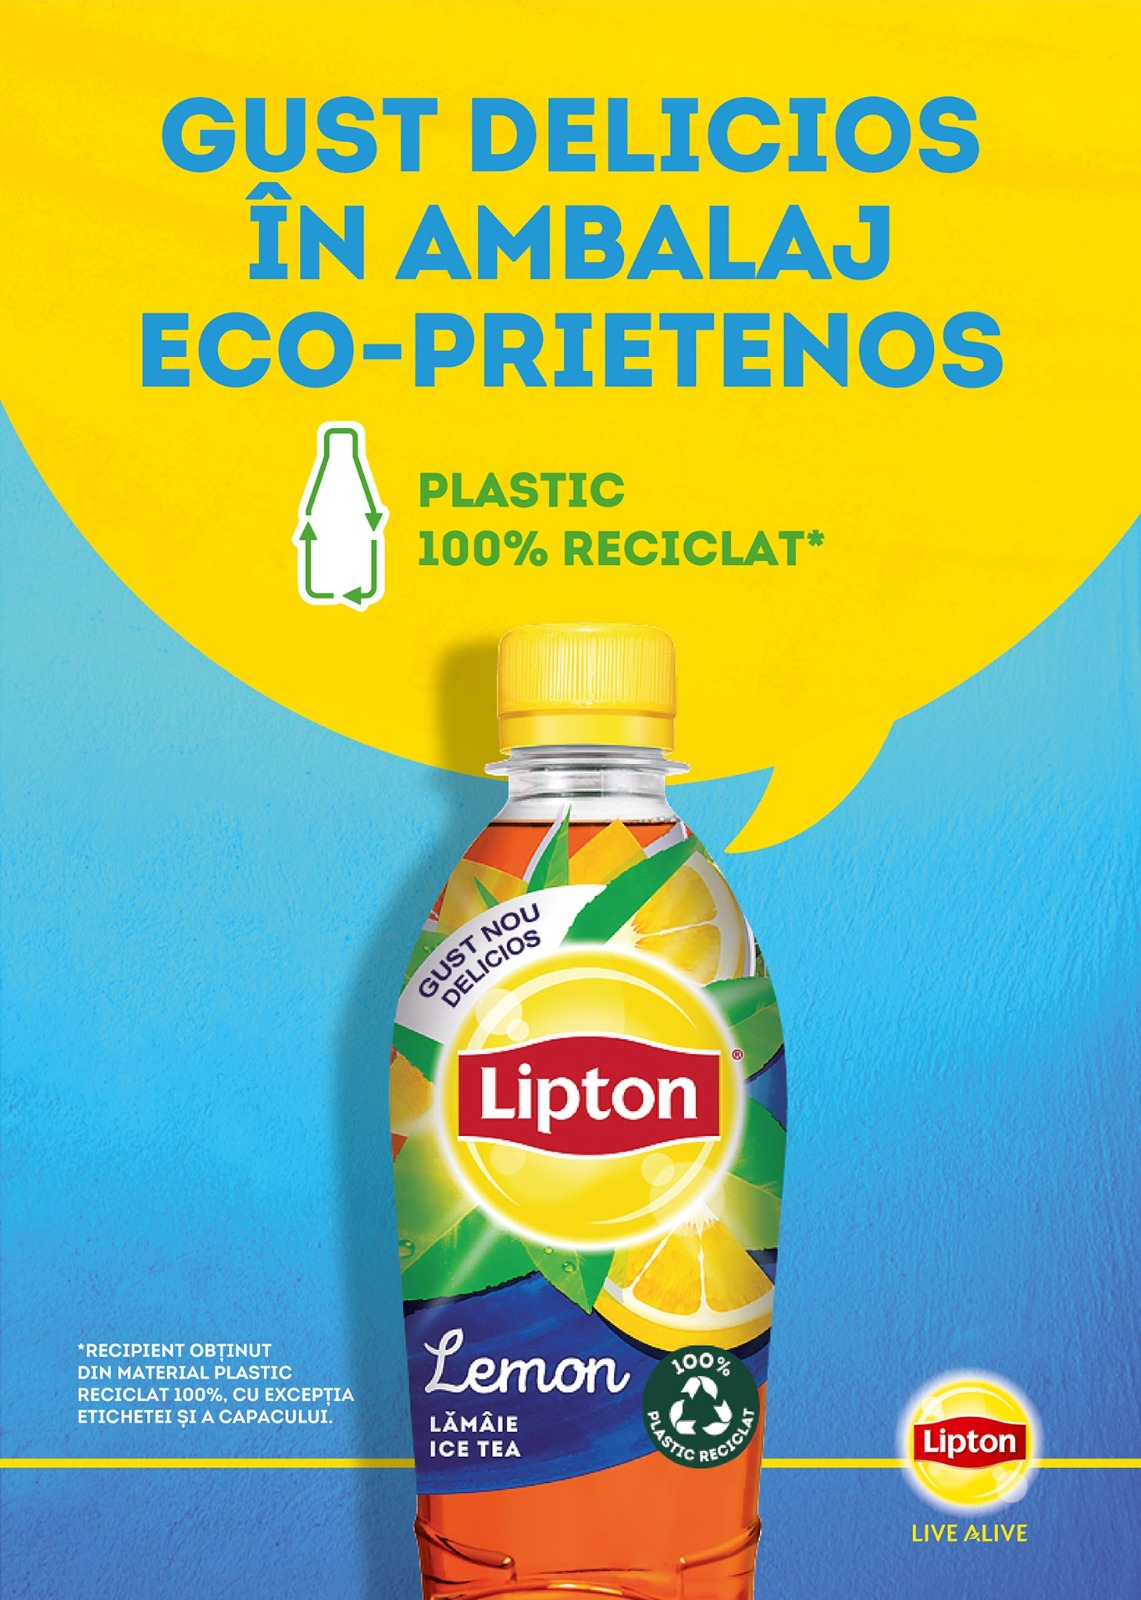 PepsiCo’s vision is a world where packaging never becomes waste